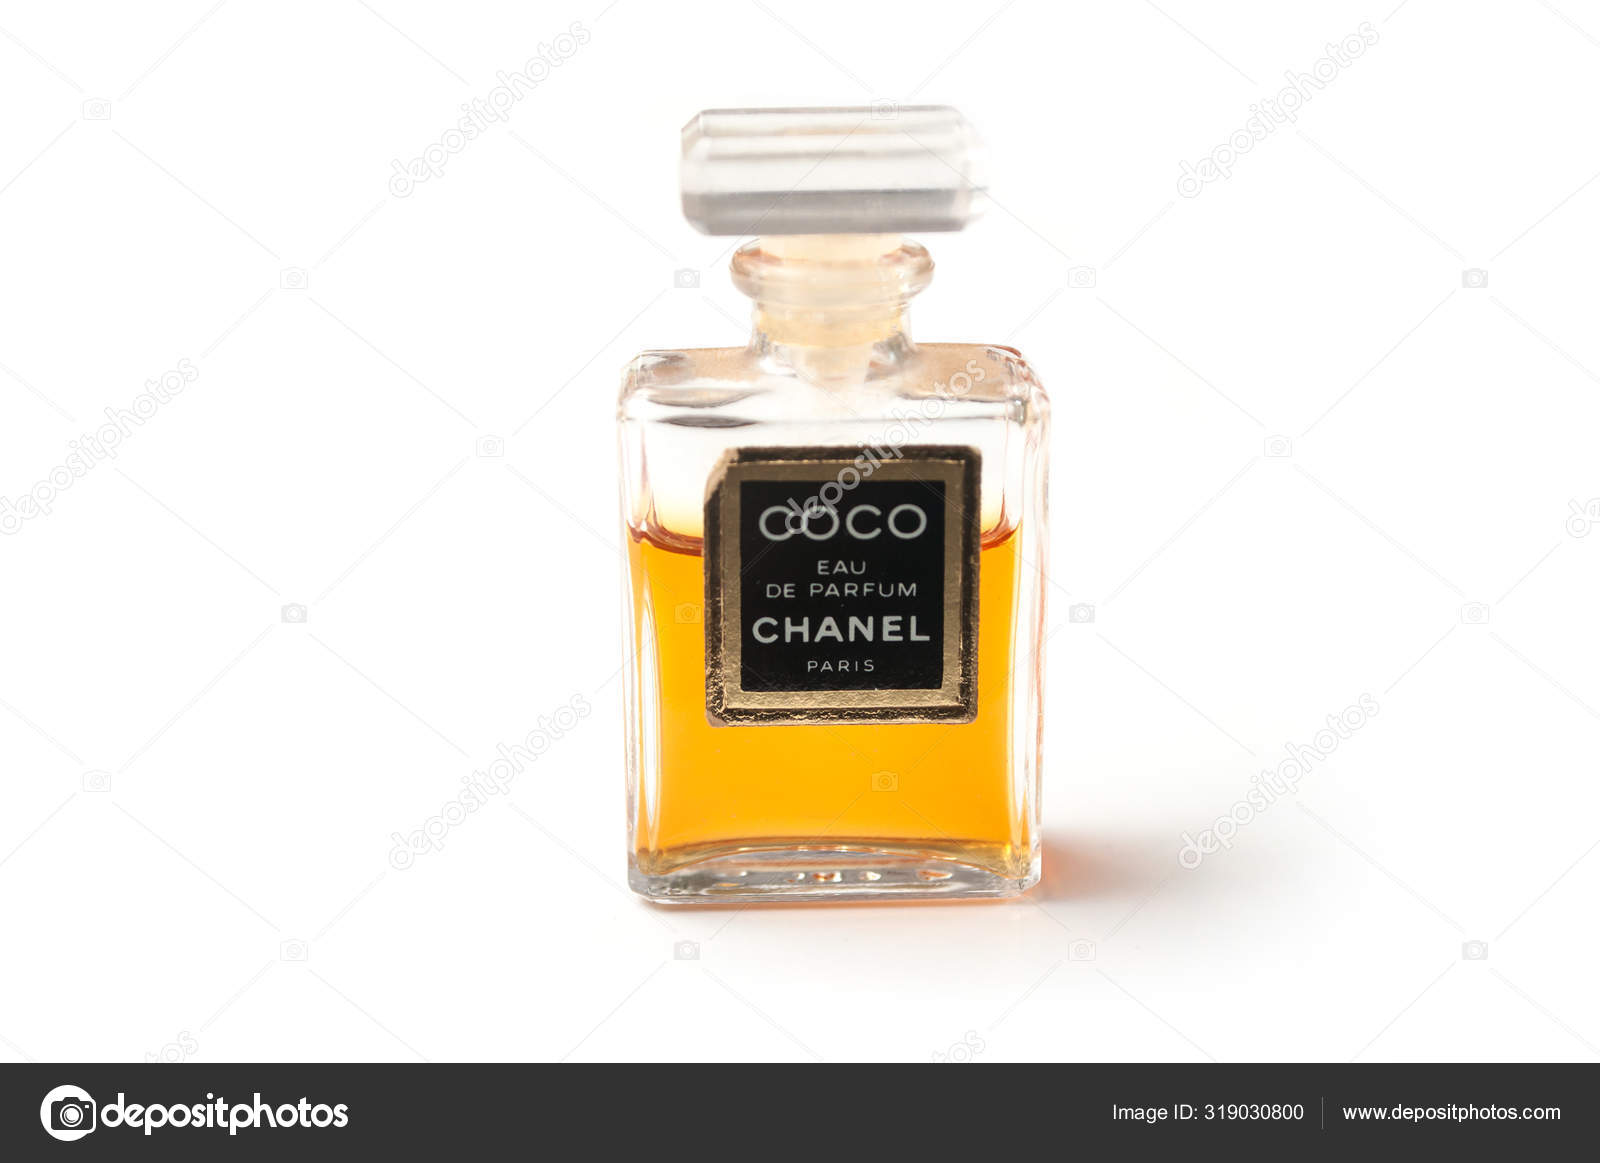 Coco Chanel Perfume in transparet bottle on white background